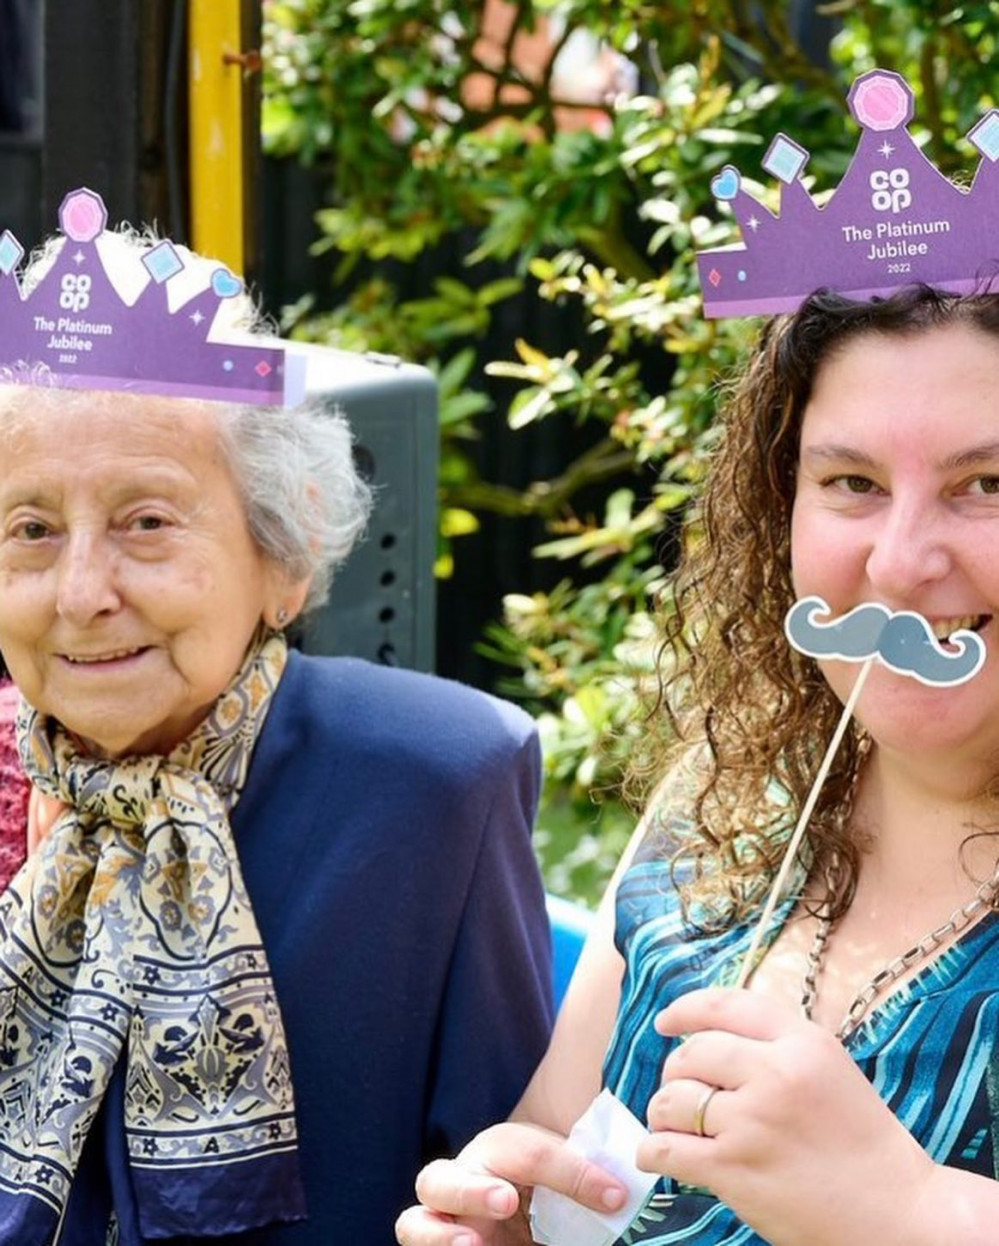 Hats off to the Co-op whose Platinum Jubilee crowns were a big hit at the event  